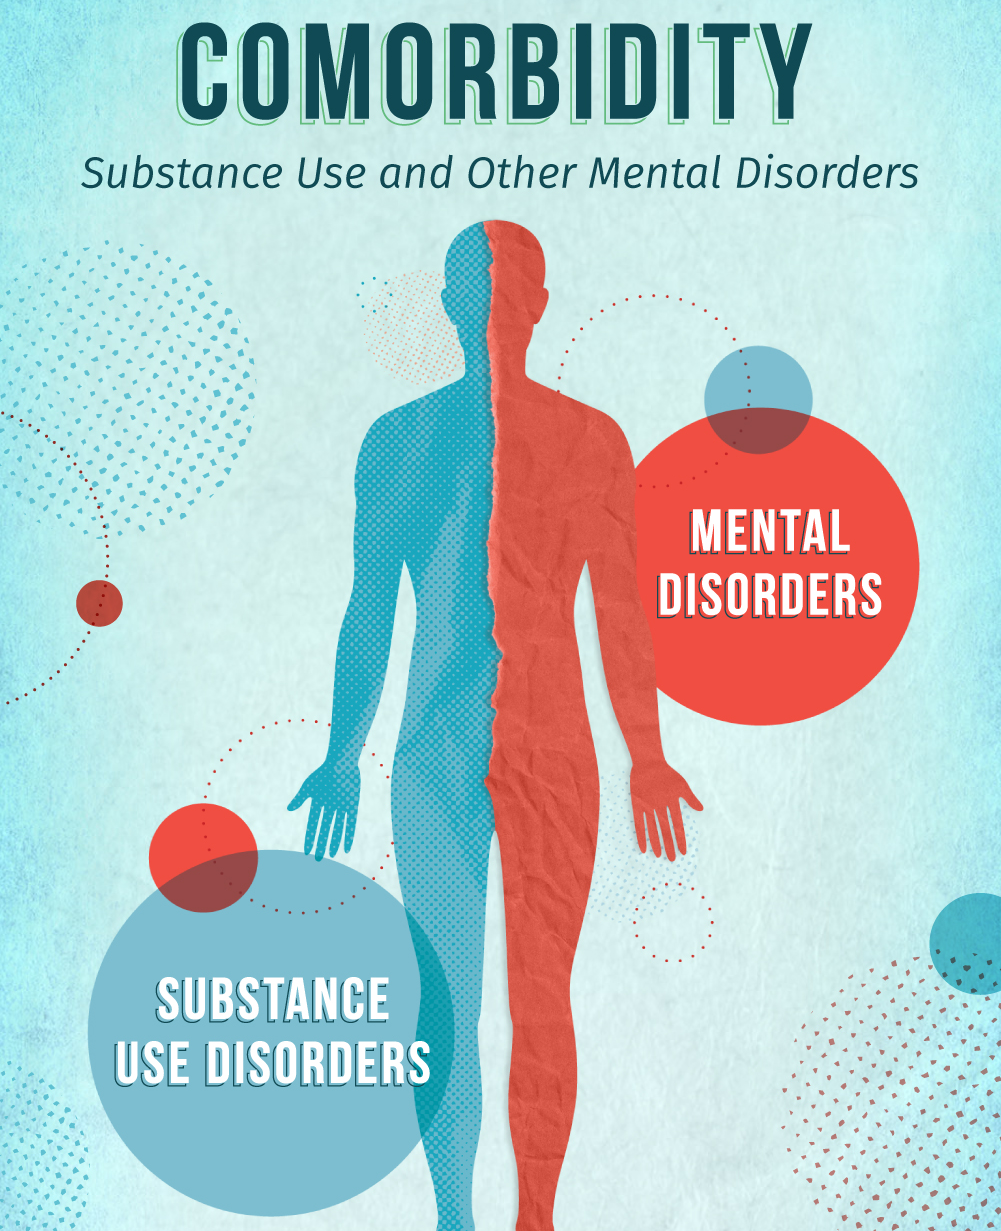 Substance Use Disorders and Other Mental Illnesses| de-addiction center in jaipur 